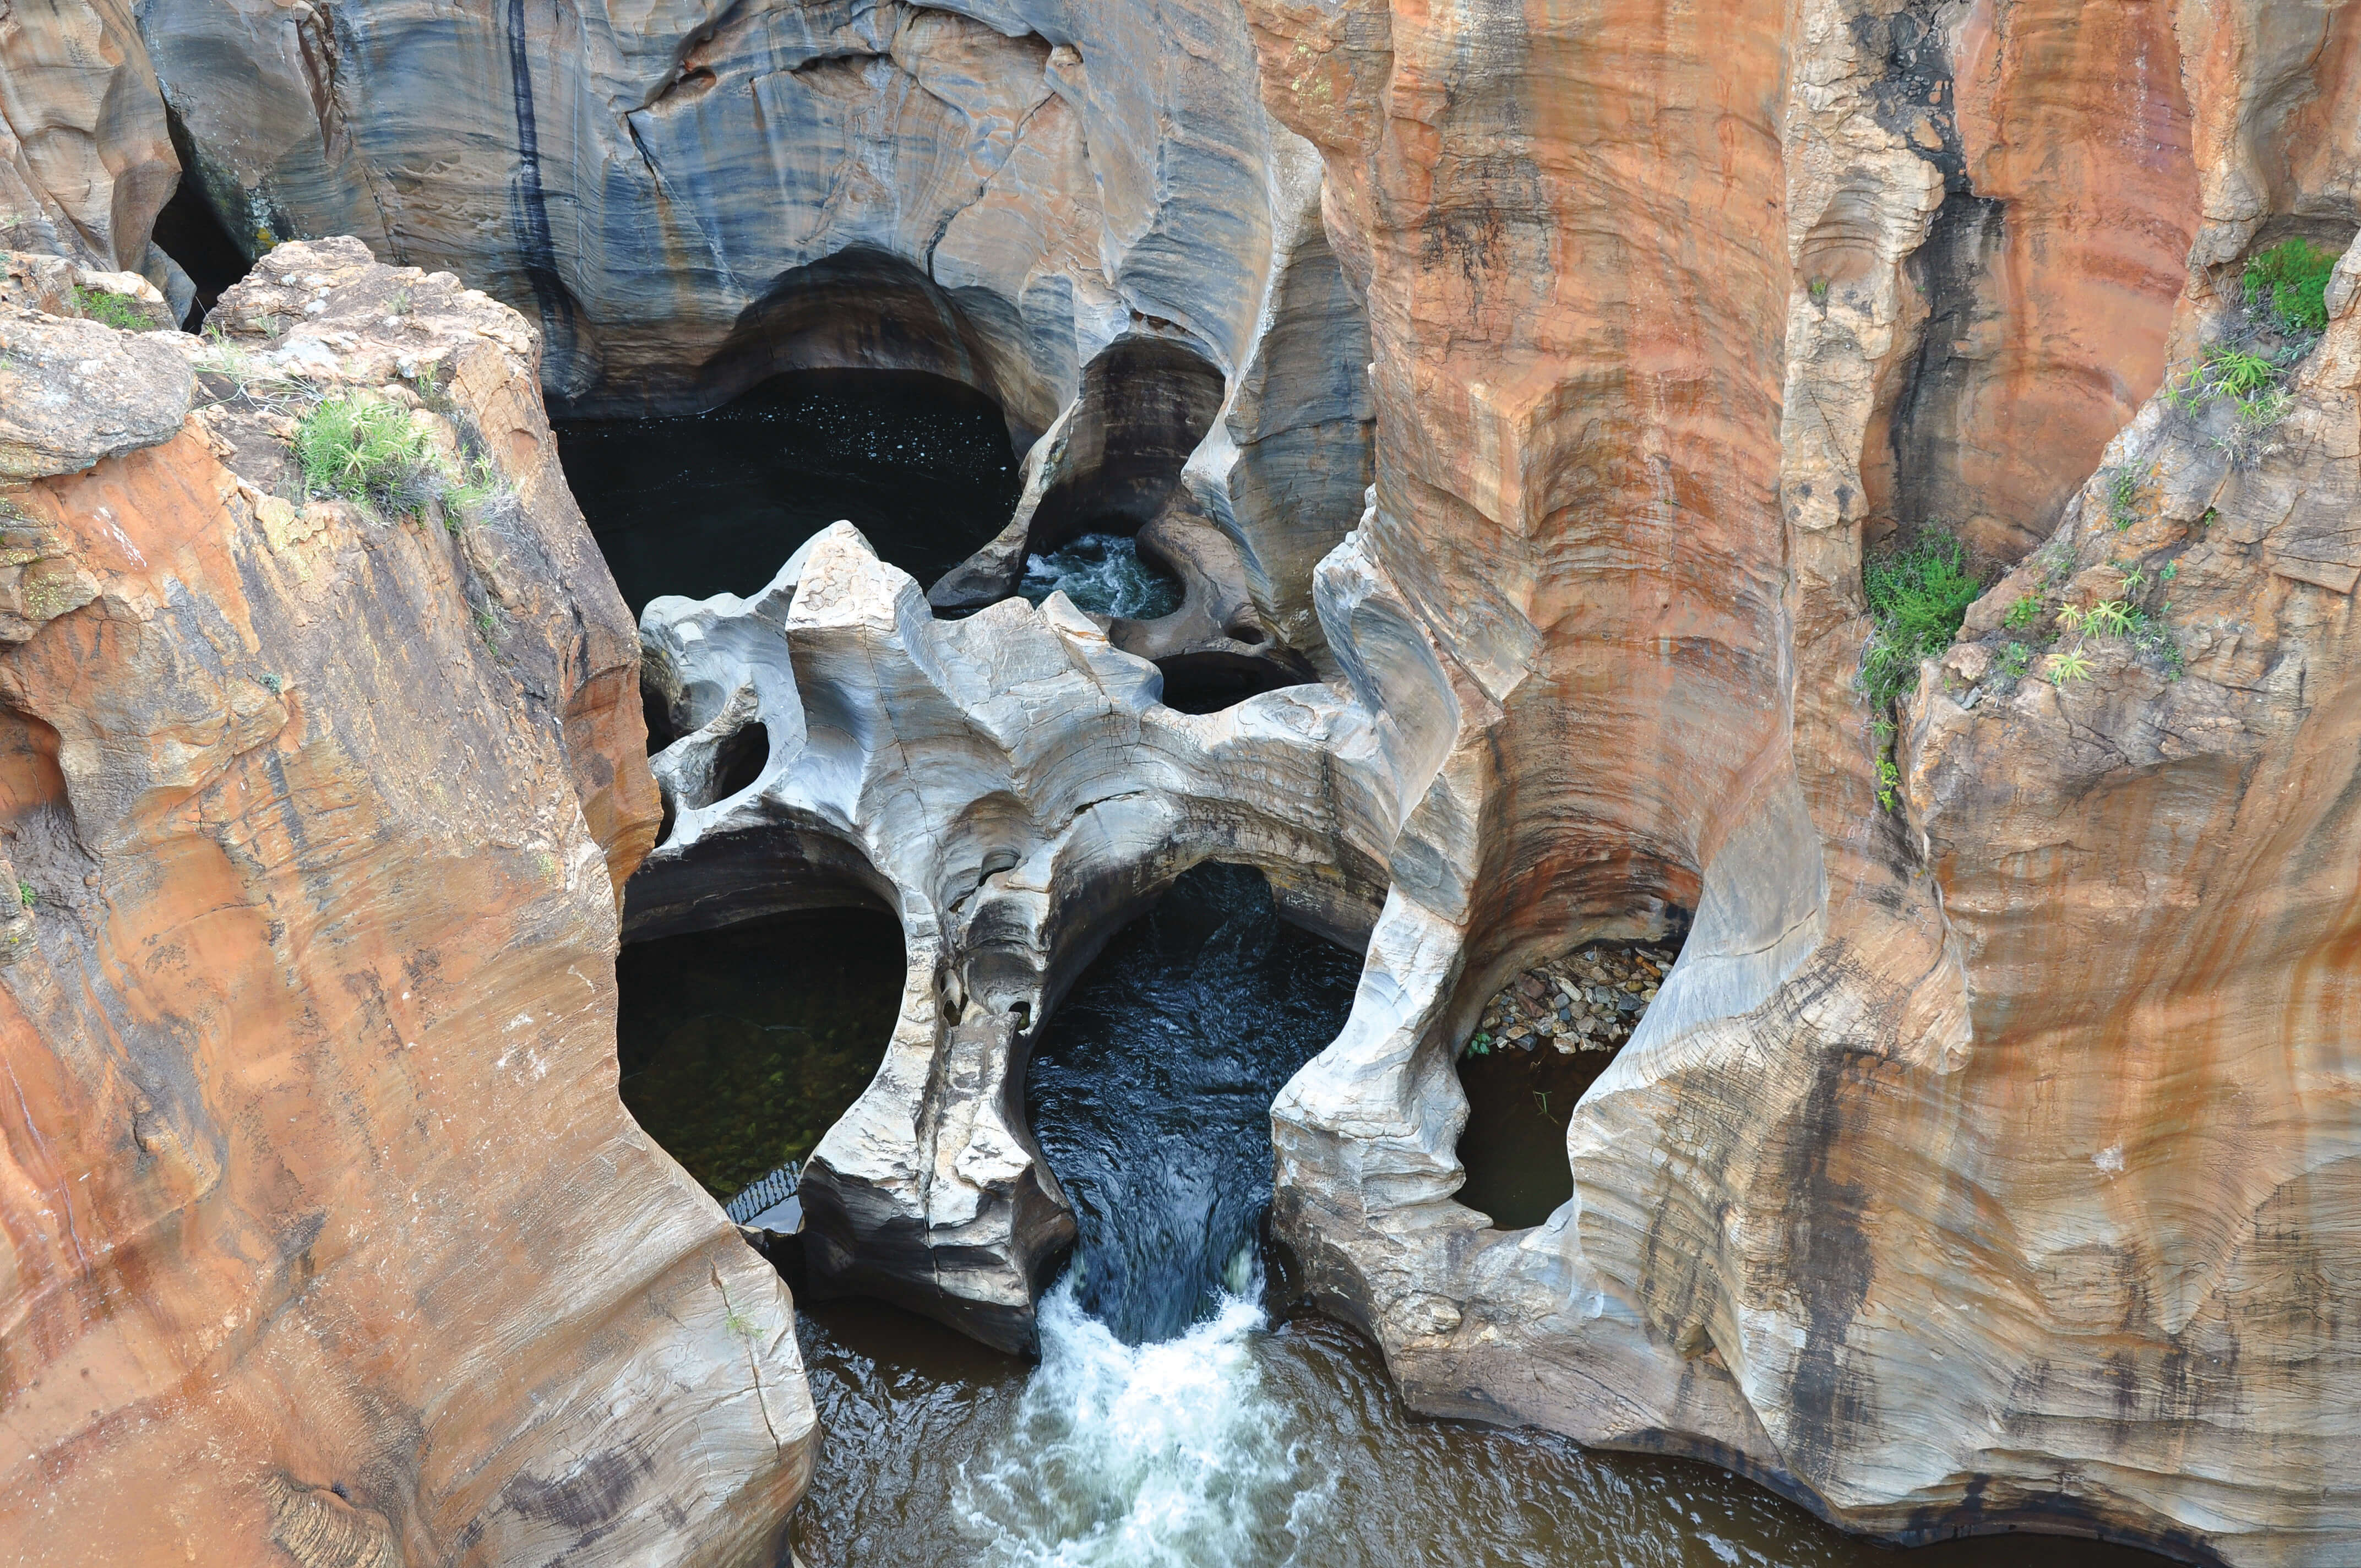 Bourke's Luck Potholes Panorama route Zuid-Afrika